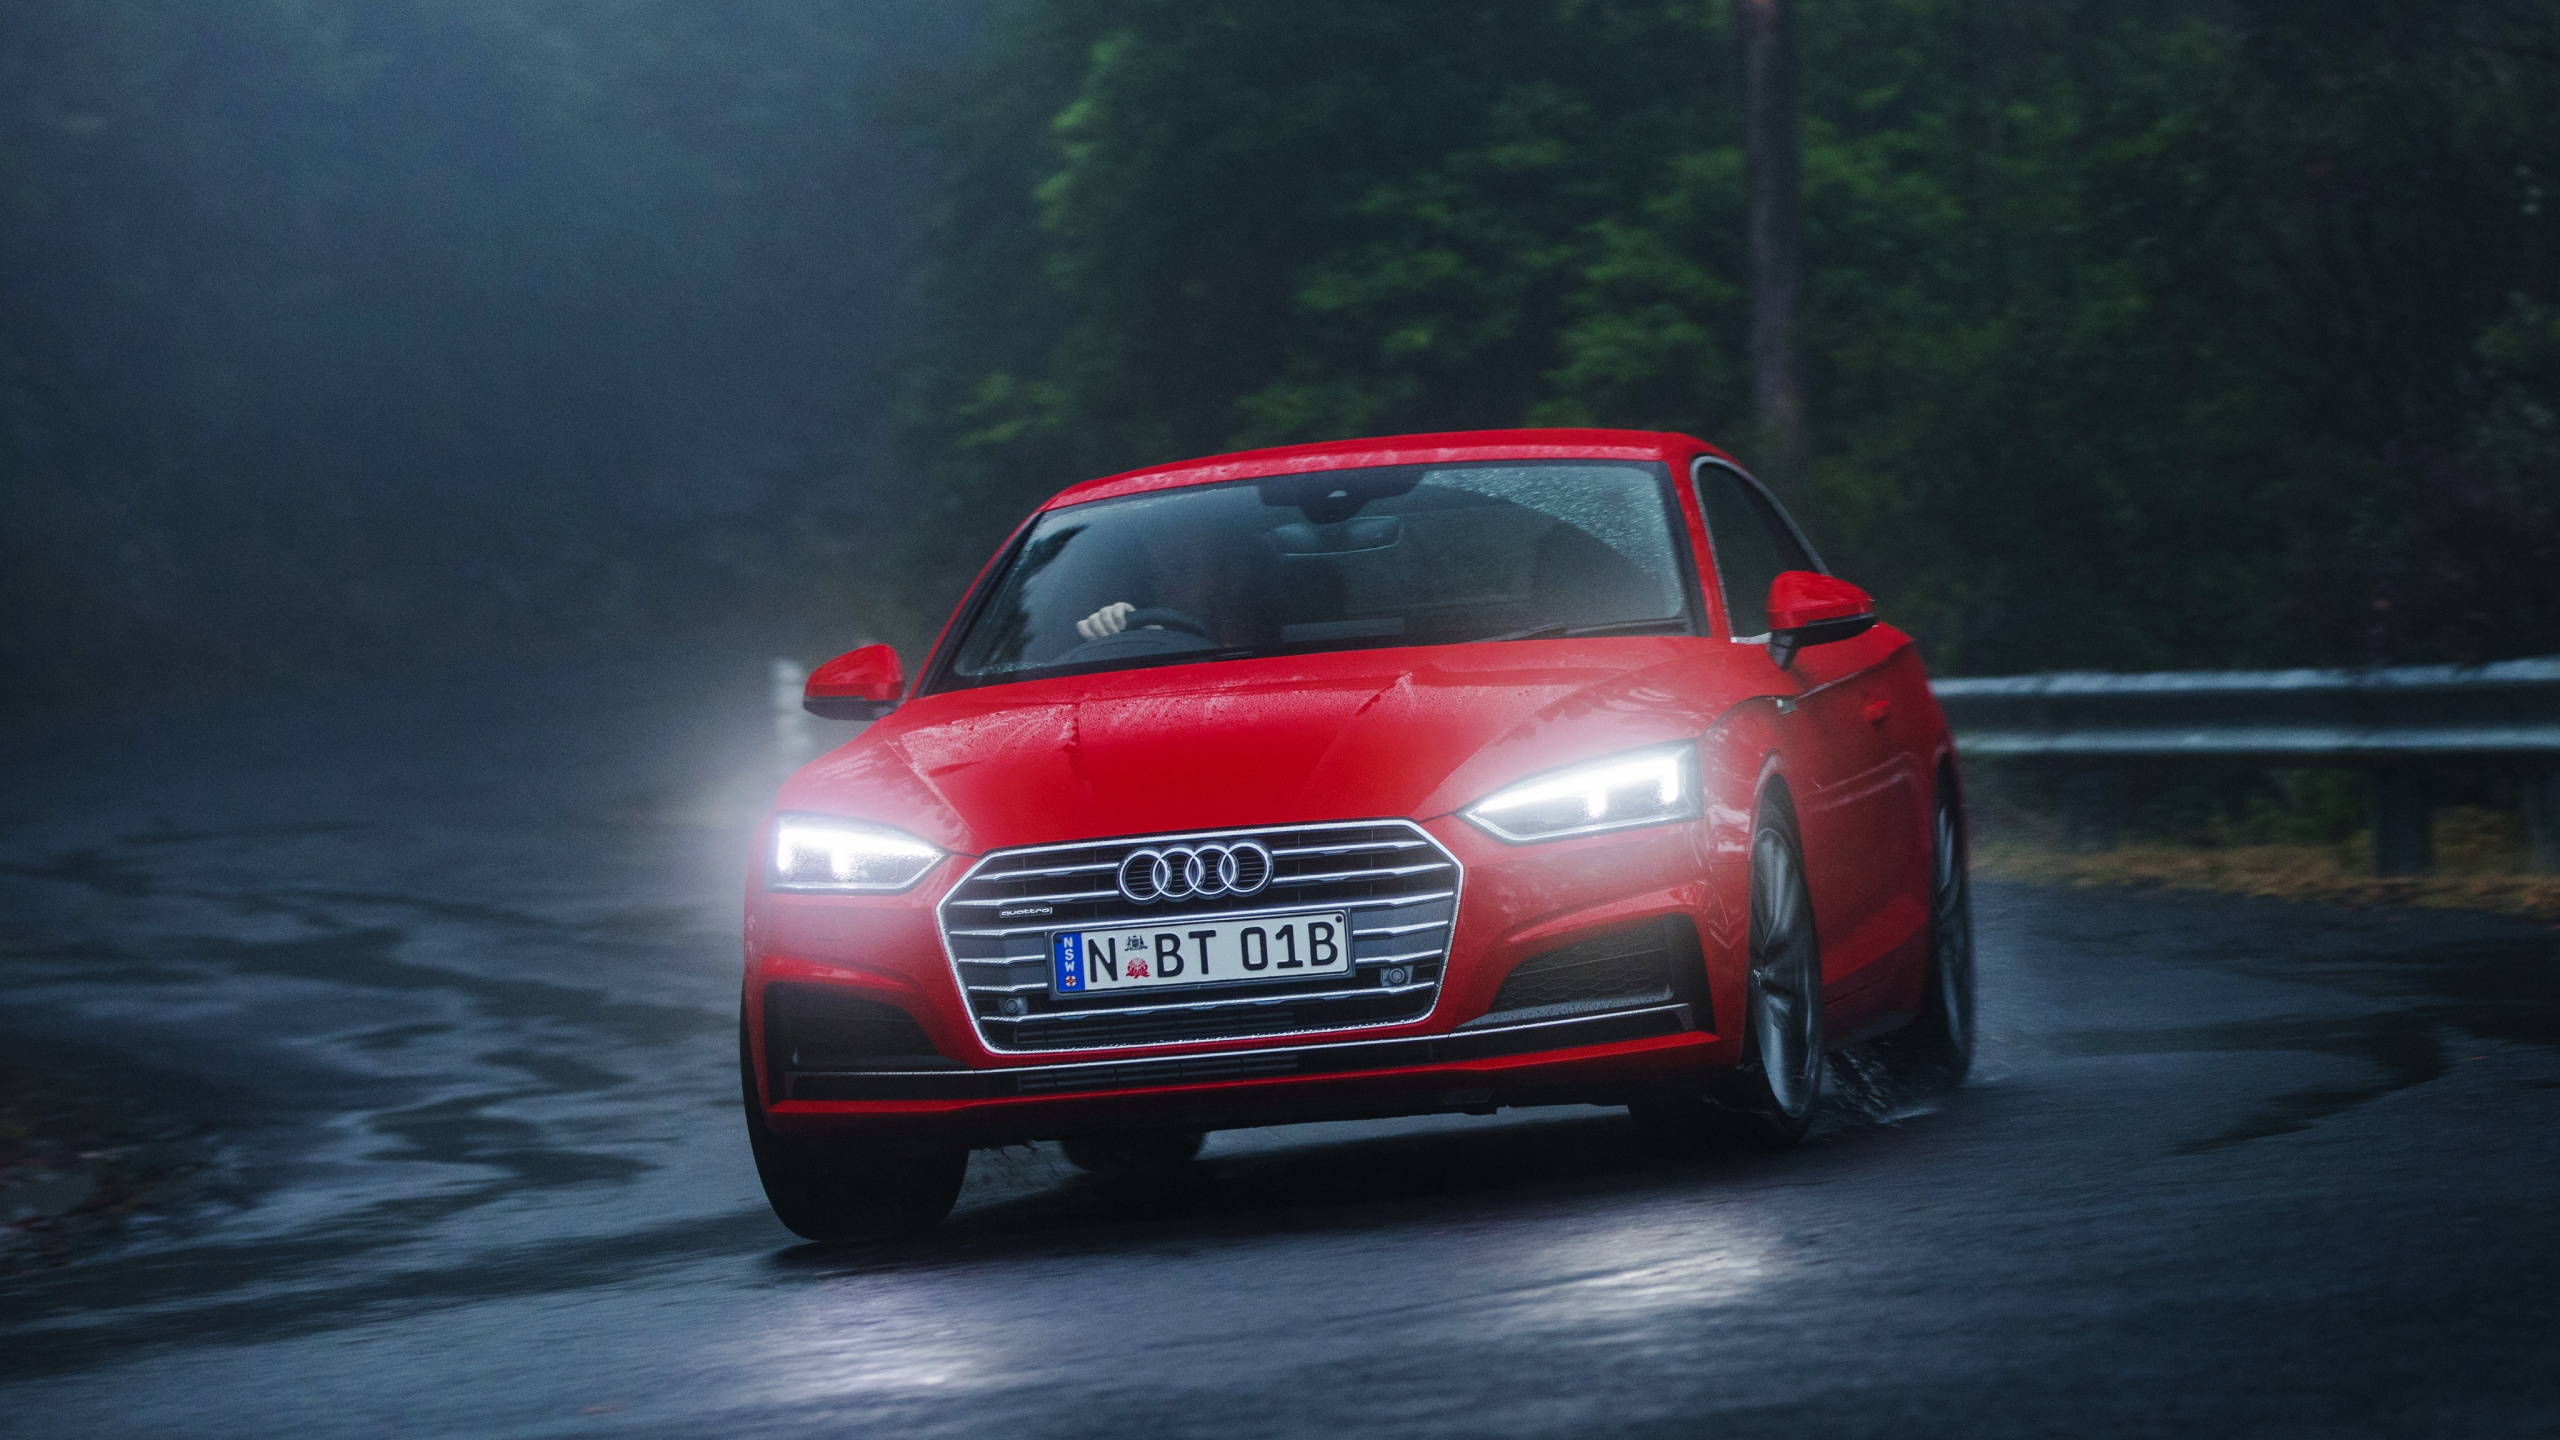 Audi Rouge a 4 Sur Route. Wallpaper in 2560x1440 Resolution